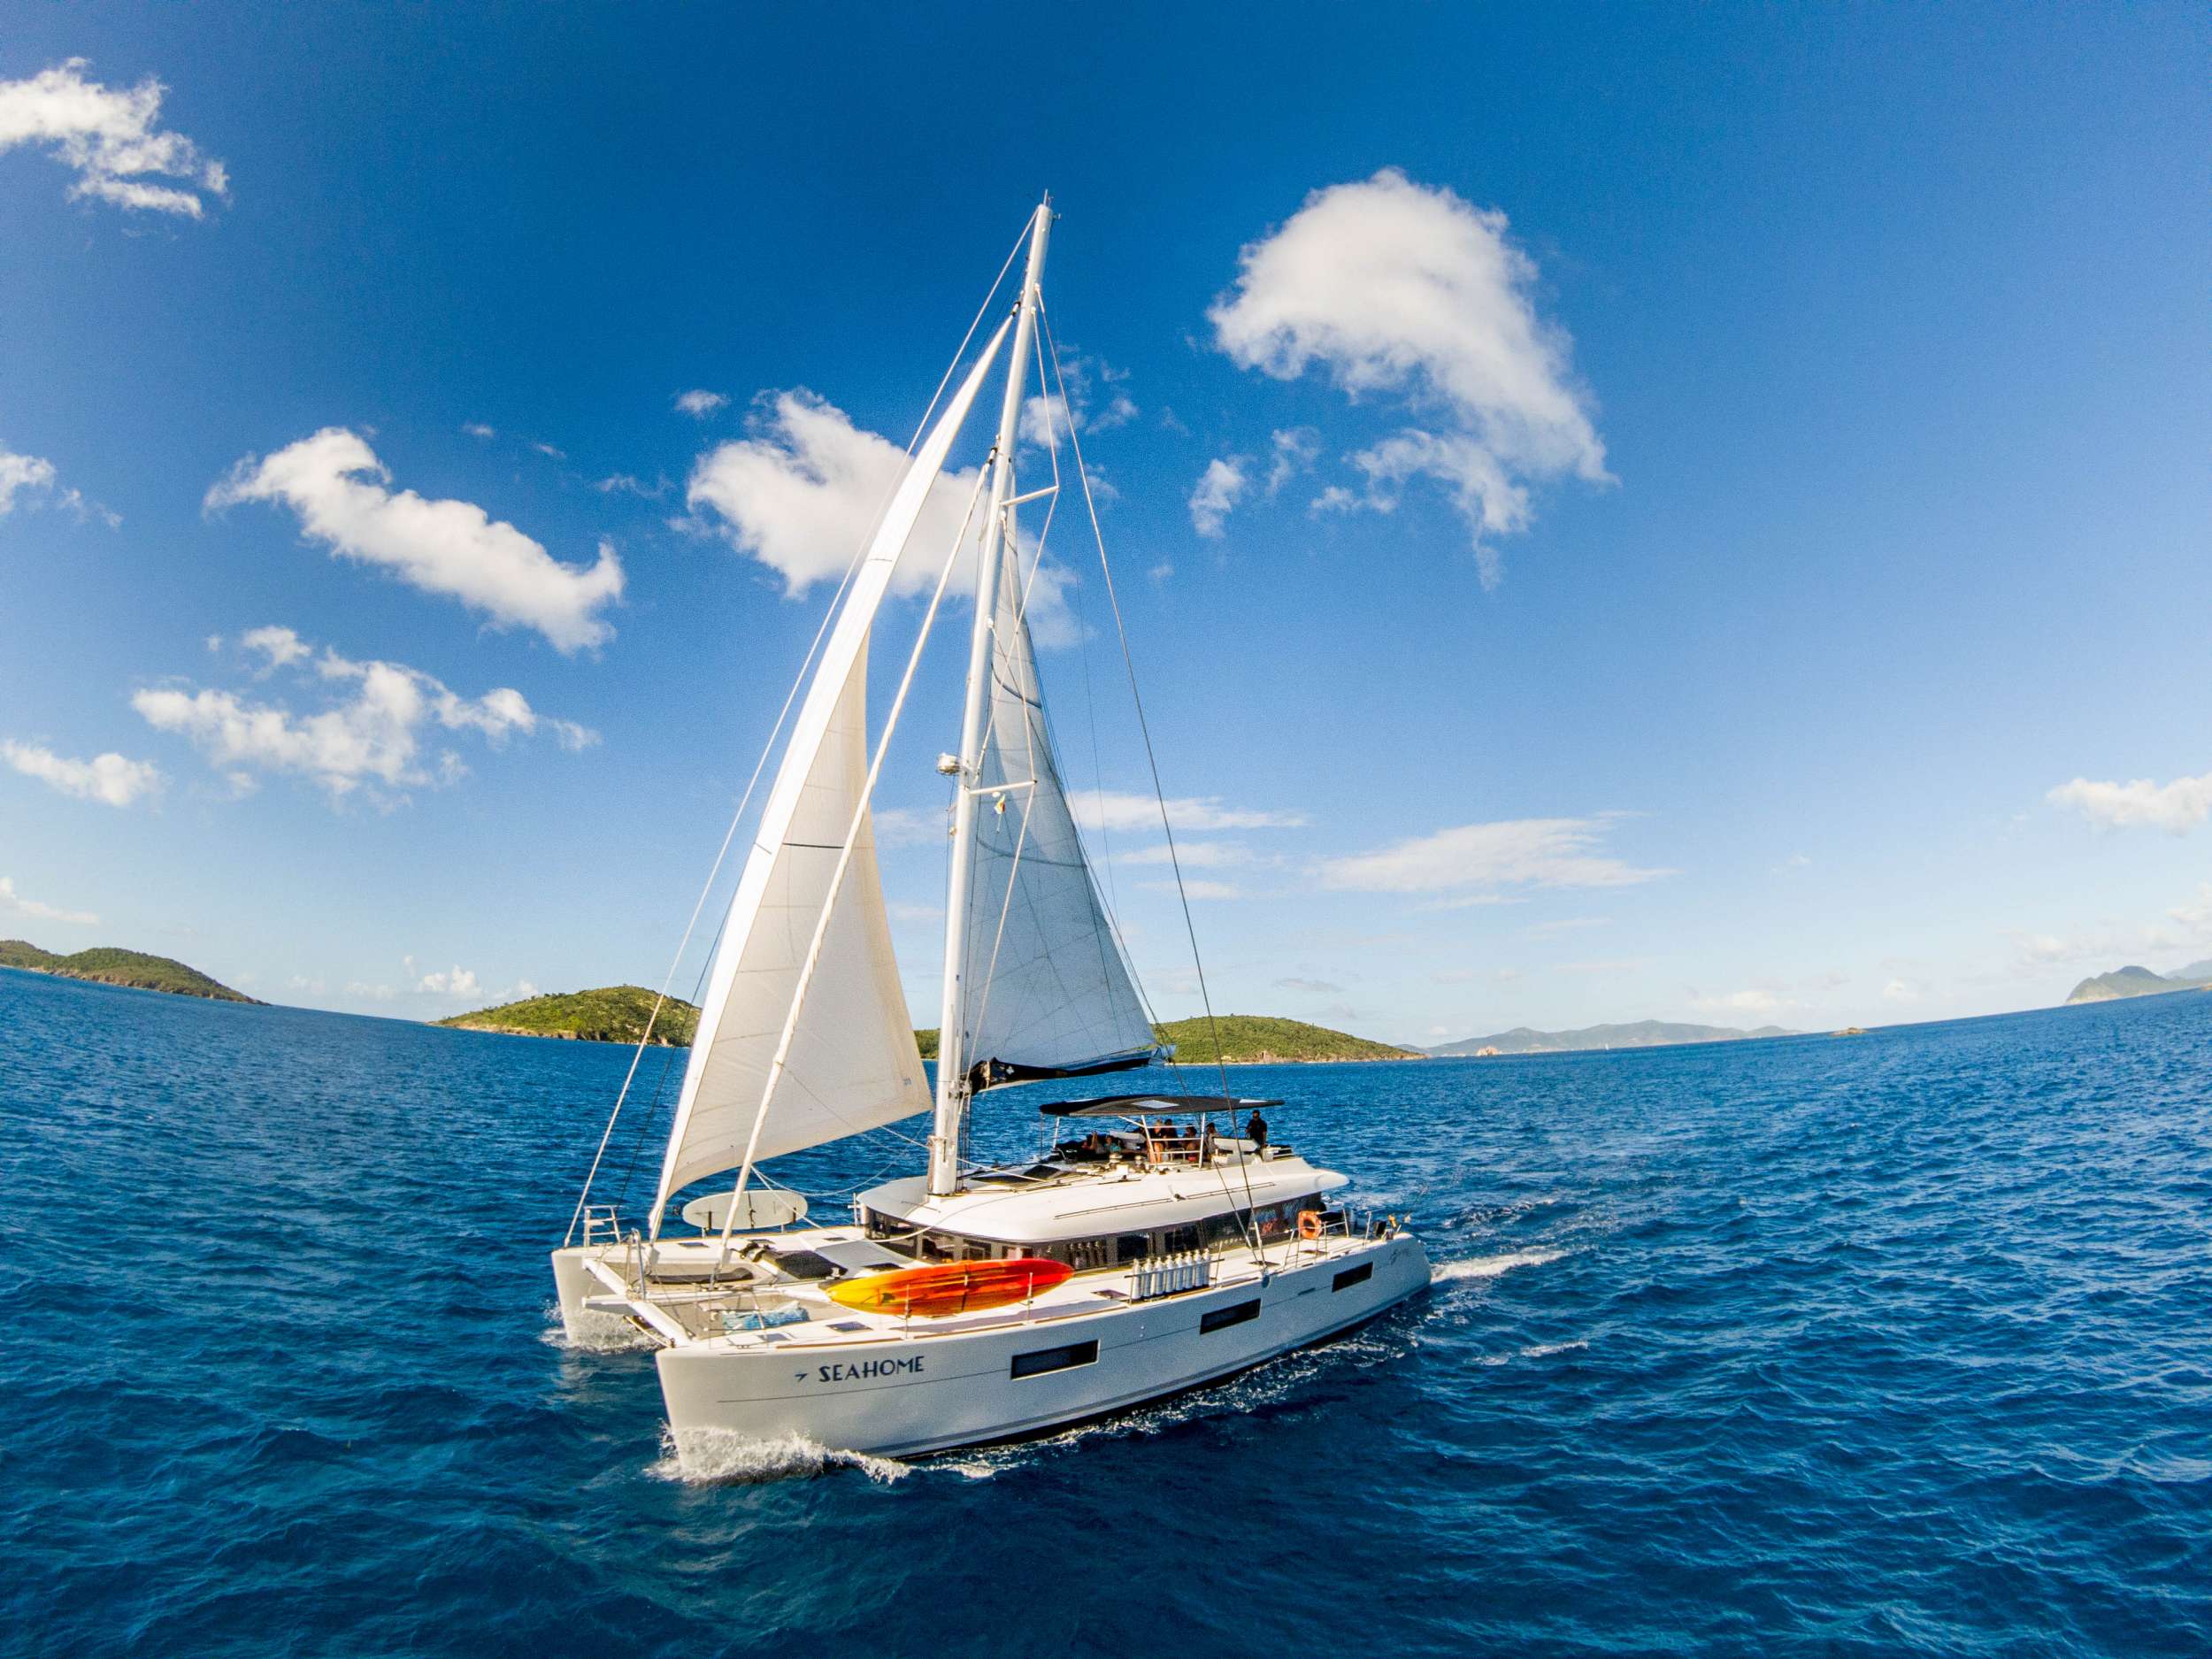 seahome - Luxury yacht charter Grenada & Boat hire in Caribbean 1